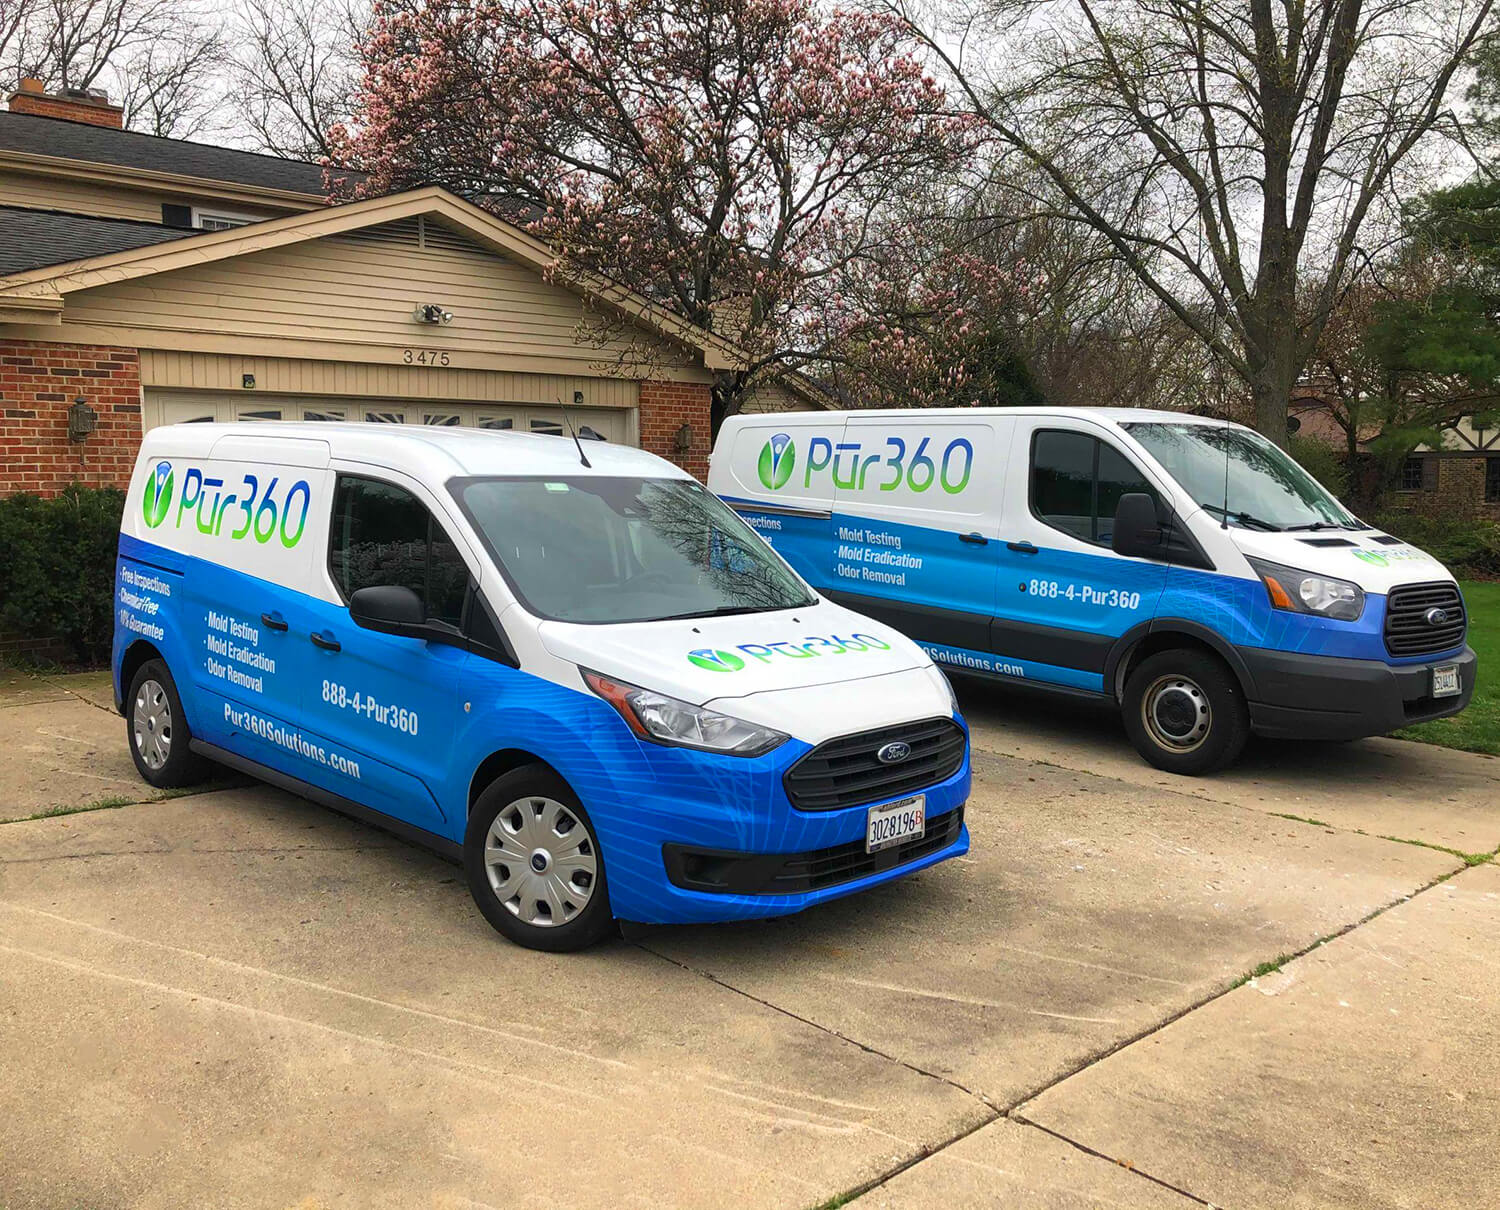 Two Pur360 service vans parked outside on the driveway of a home